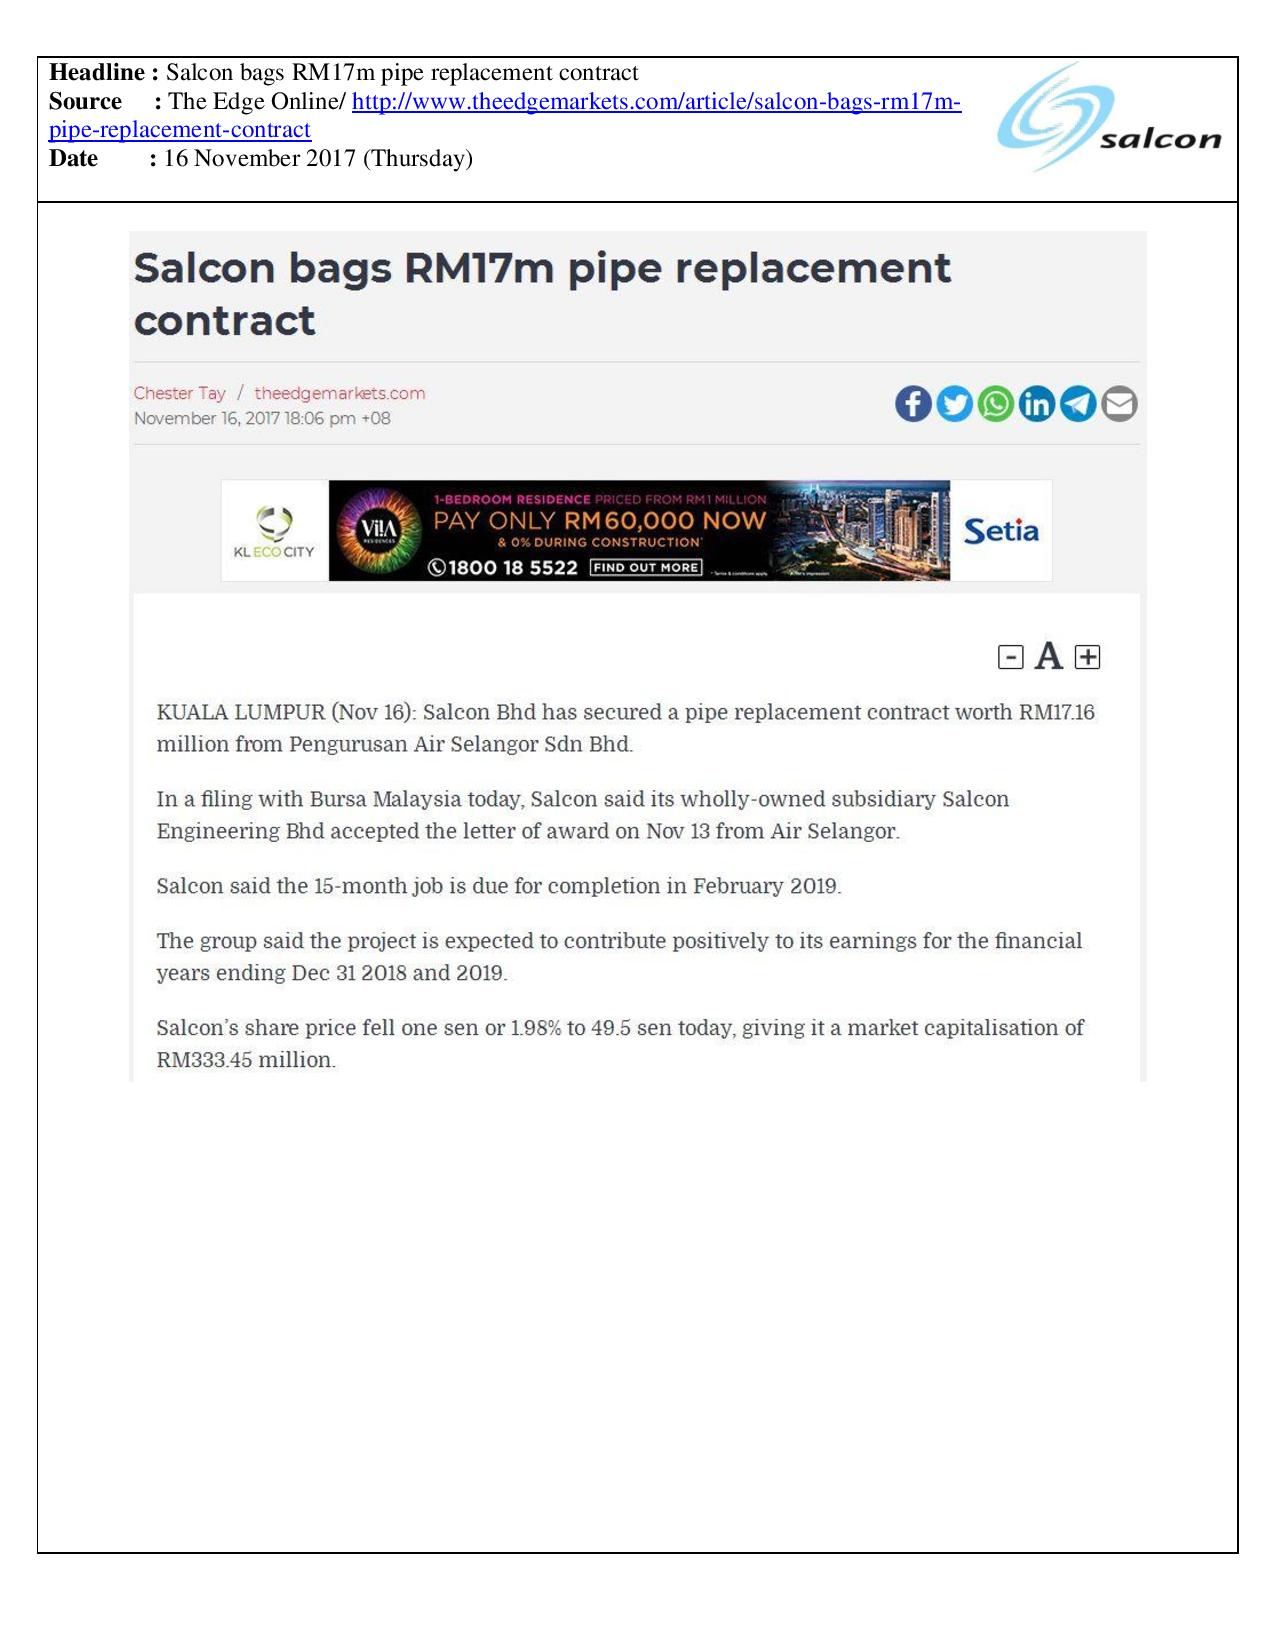 Salcon bags RM17m pipe replacement contract